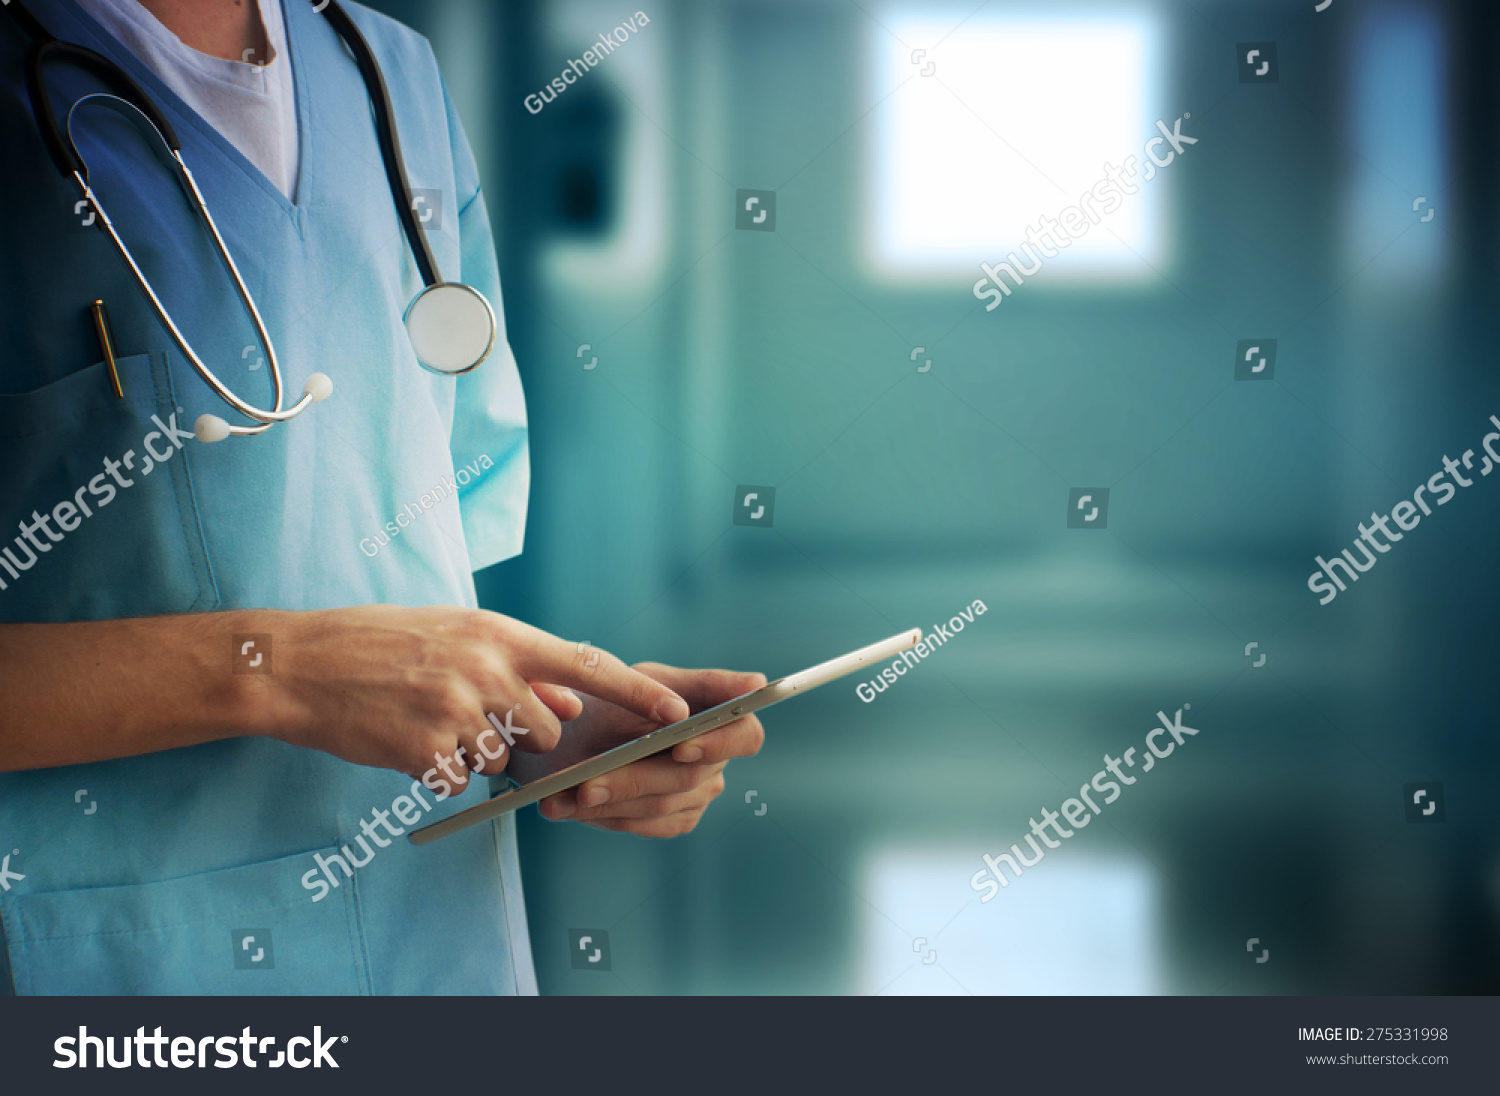 Healthcare And Medicine. Doctor using a digital tablet #275331998